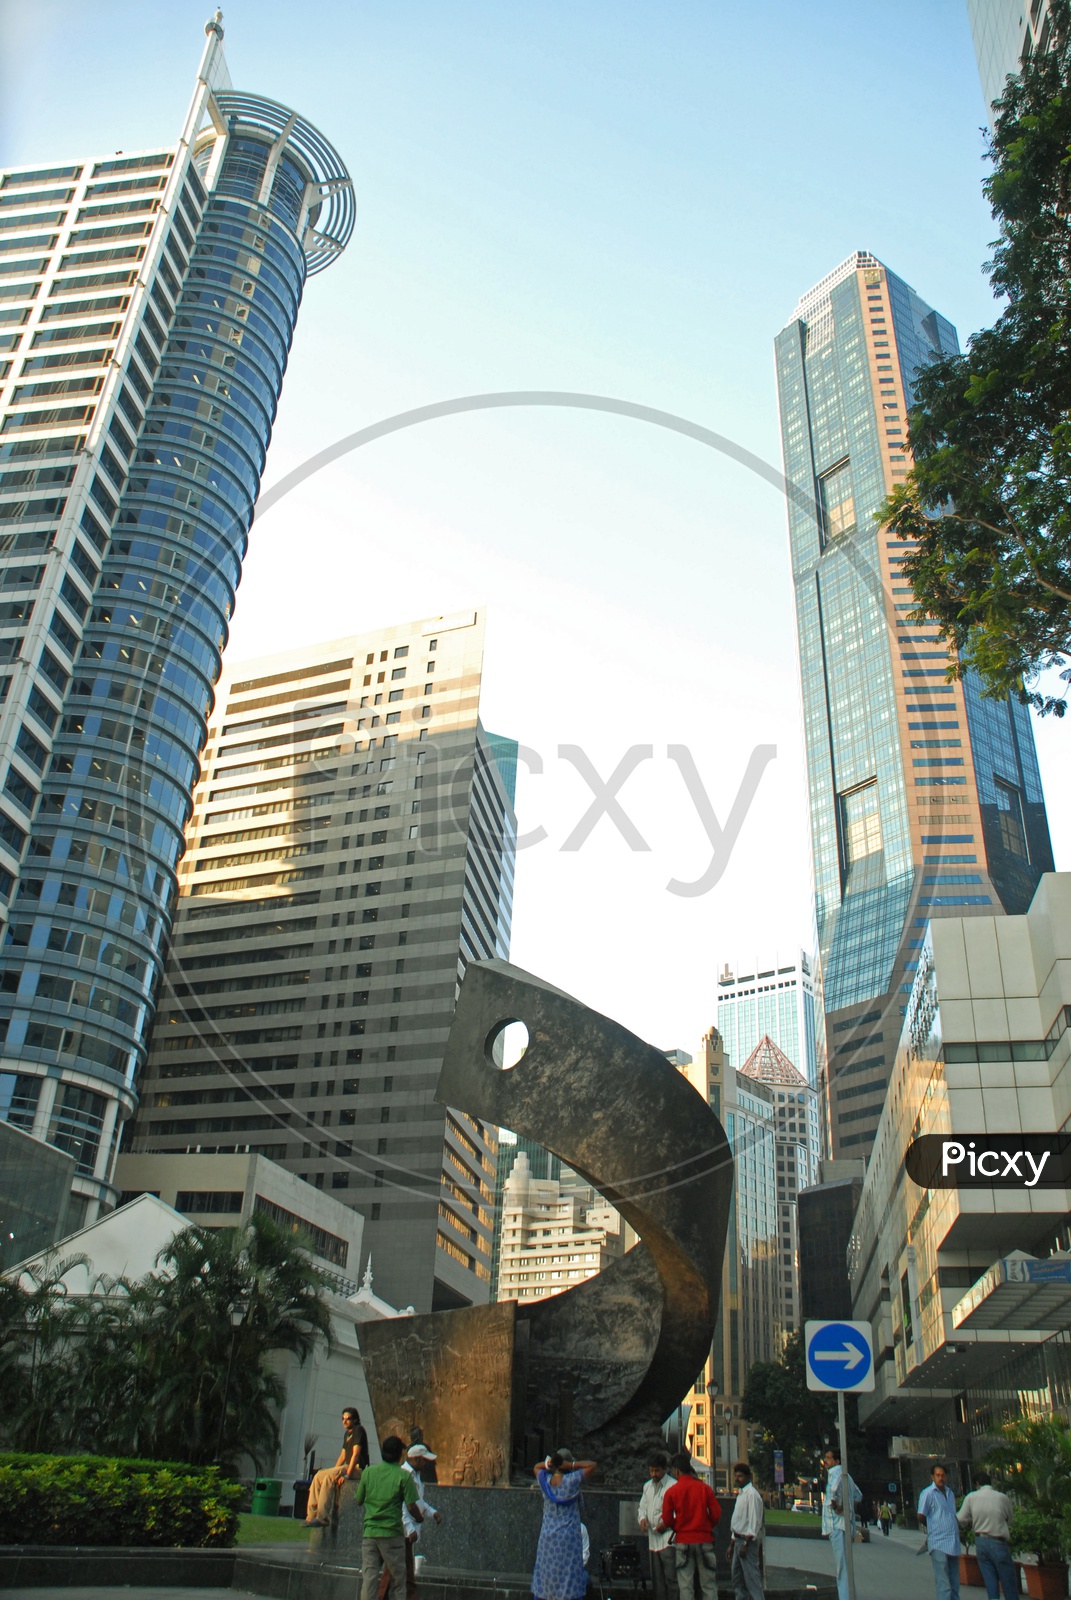 Raffles place in Singapore